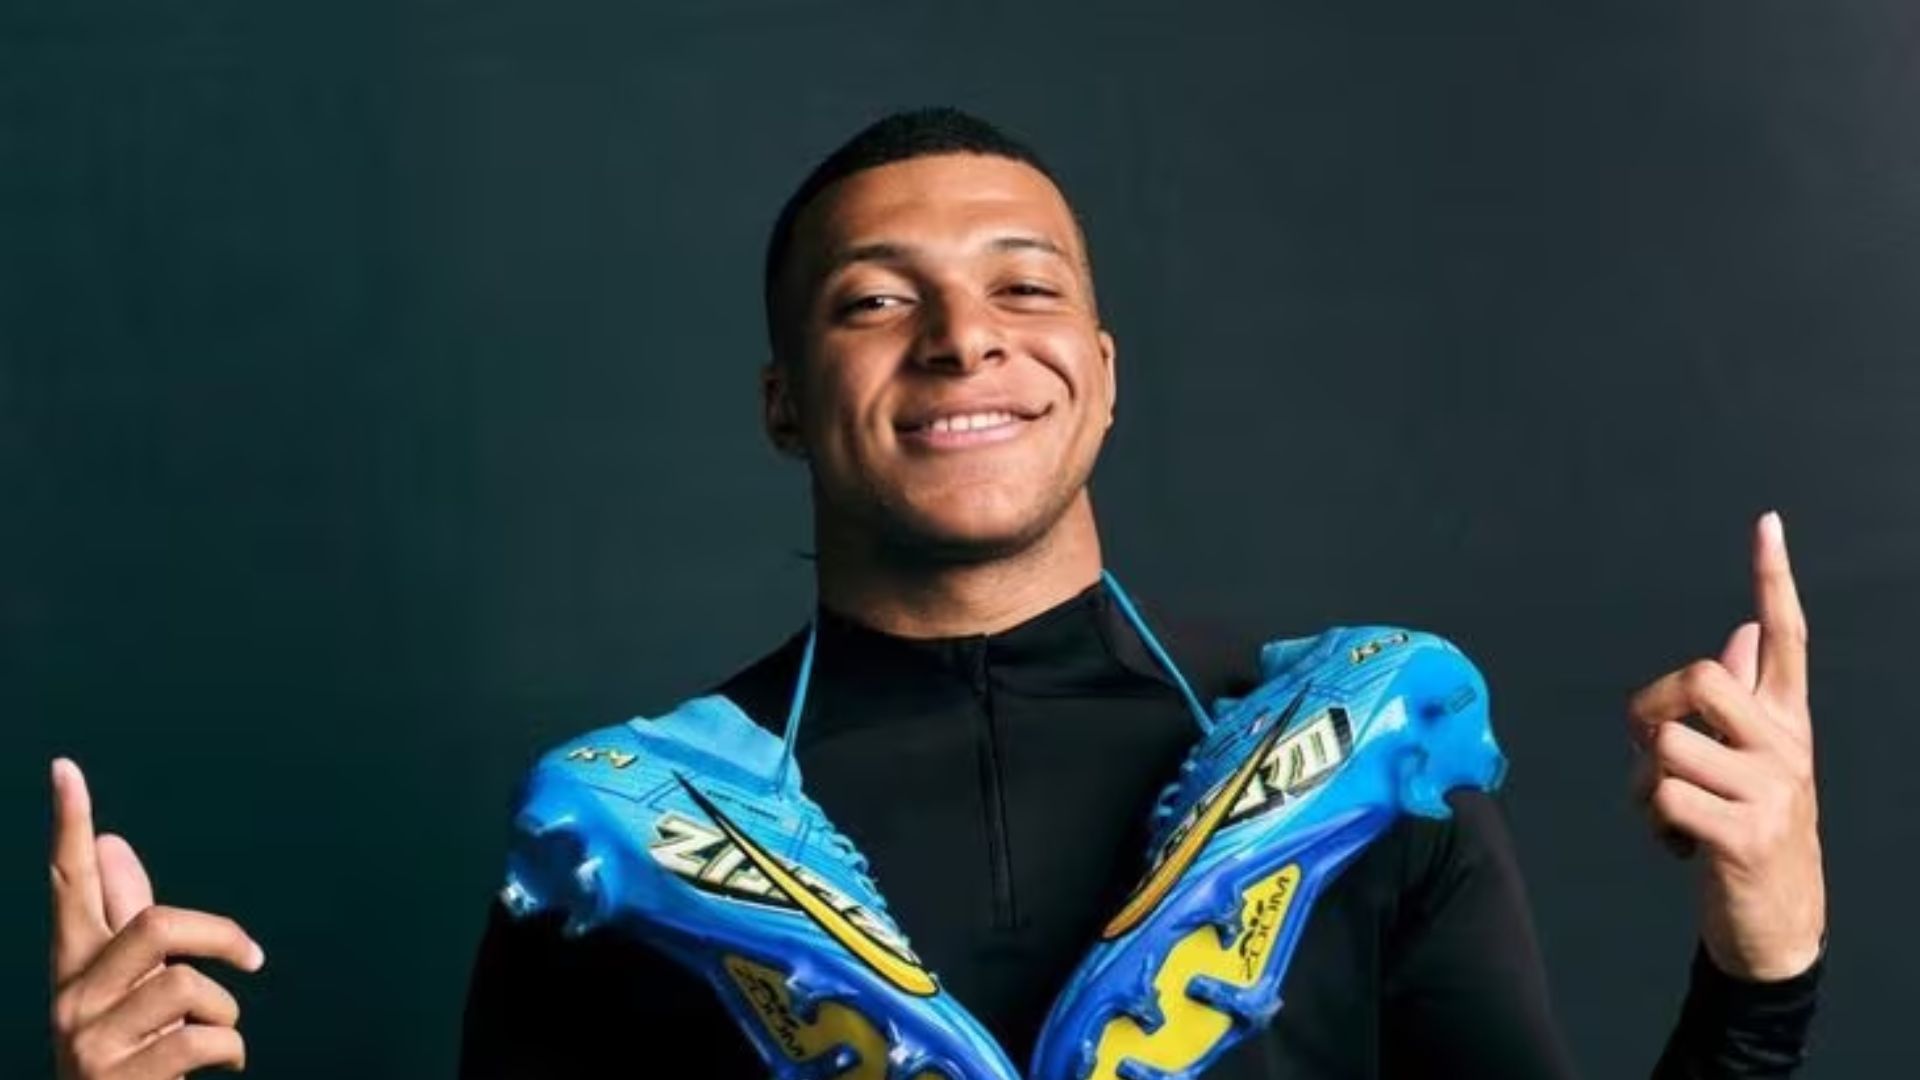 Kylian Mbappé takes steps to protect name, pose and quotes